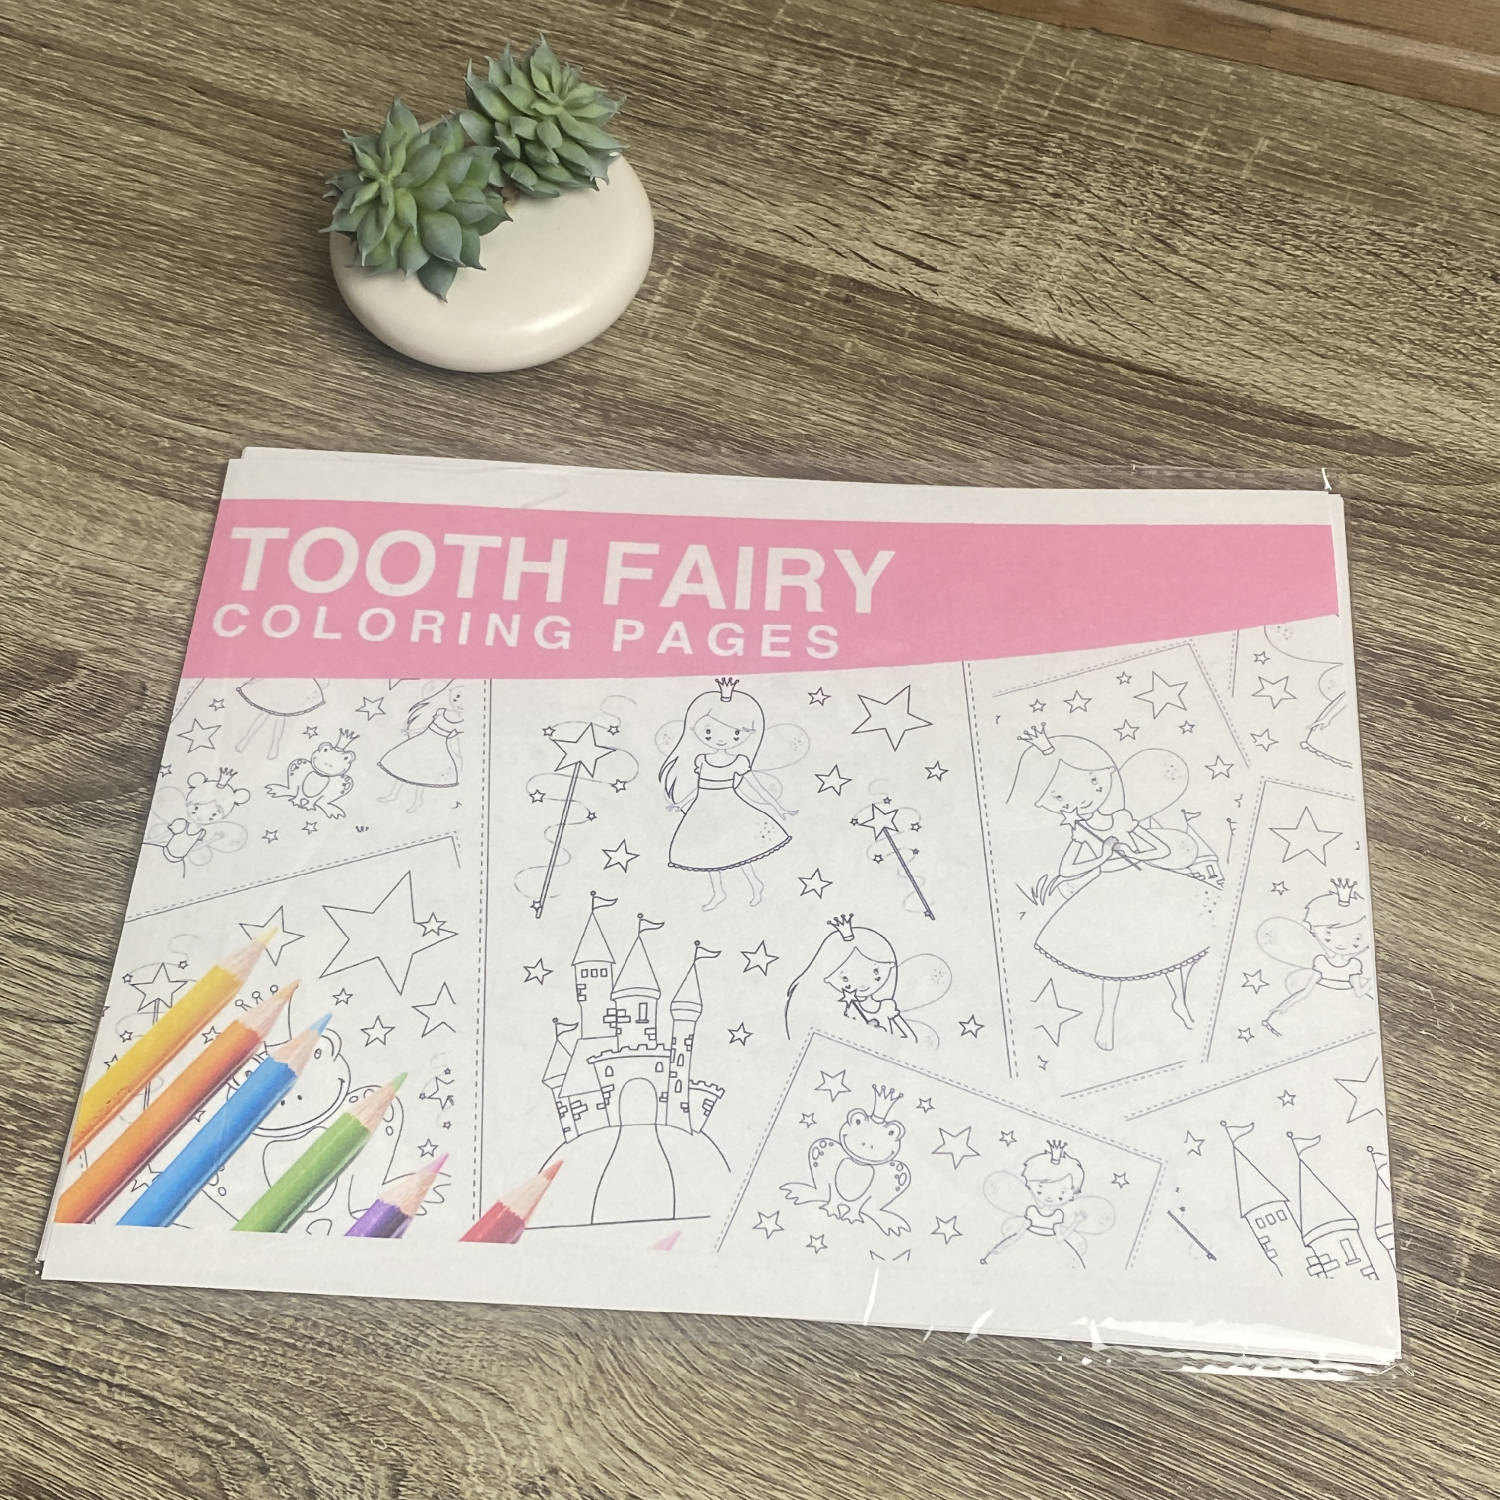 Tooth fairy coloring pages lb vellum bristol paper kids colorin â